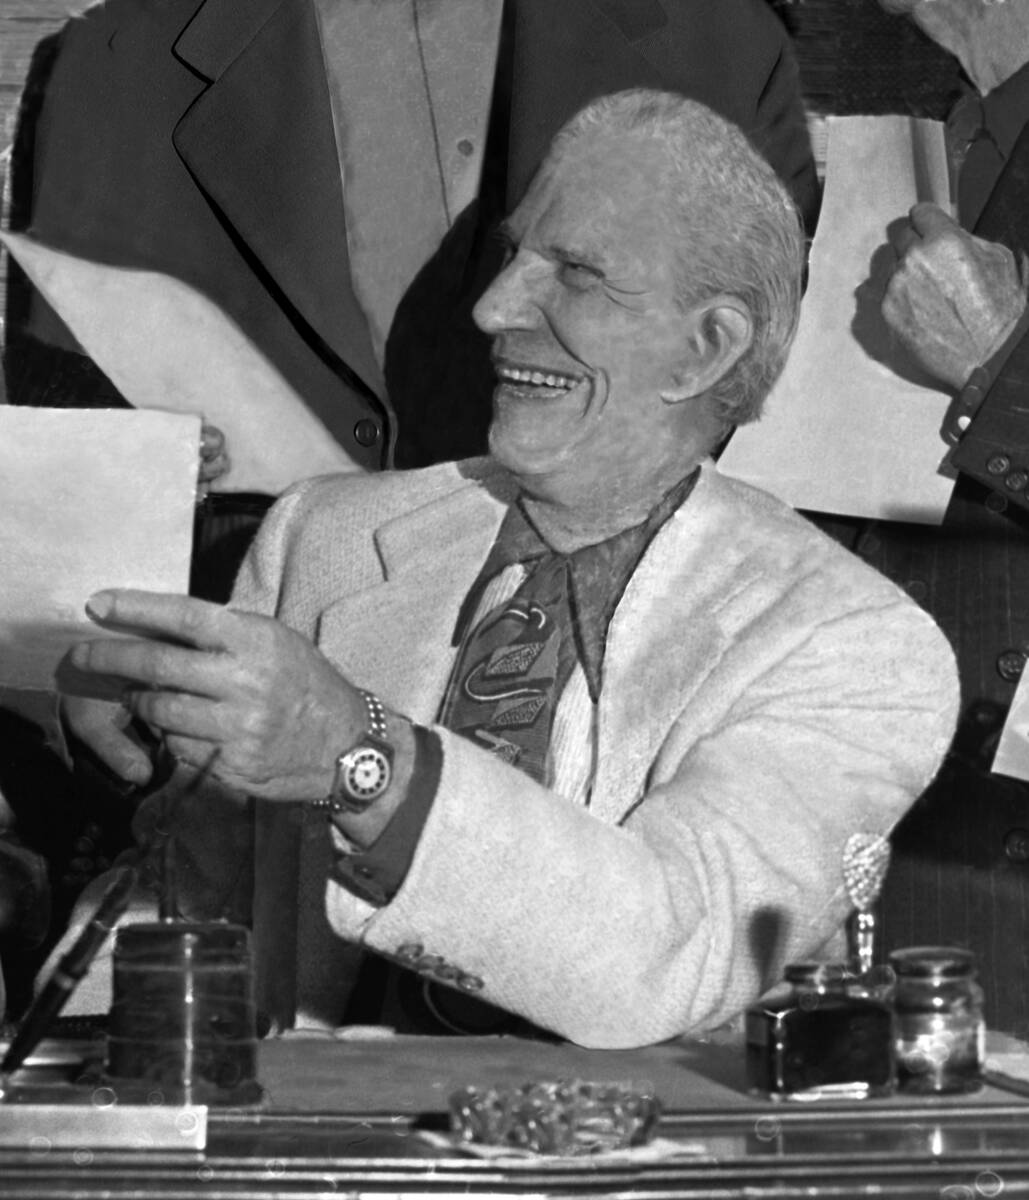 Las Vegas casino owner Guy McAfee is shown in this courtesy photograph from March 1, 1951.